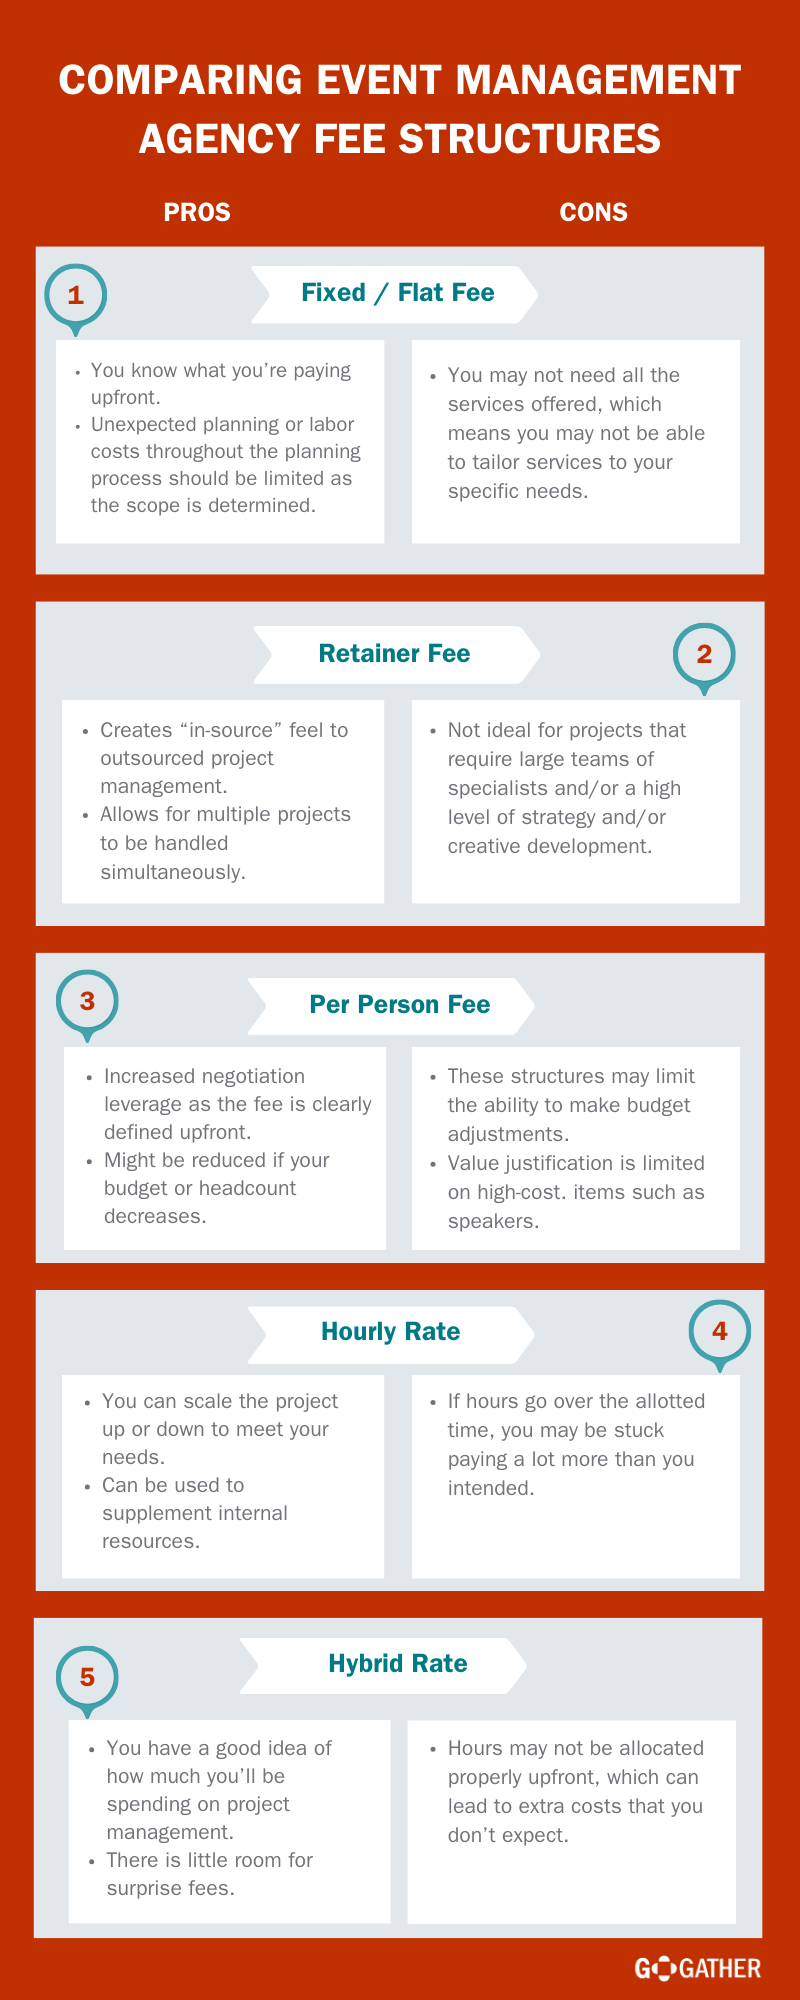 event management agency fees infographic comparing pros and cons of each fee structure